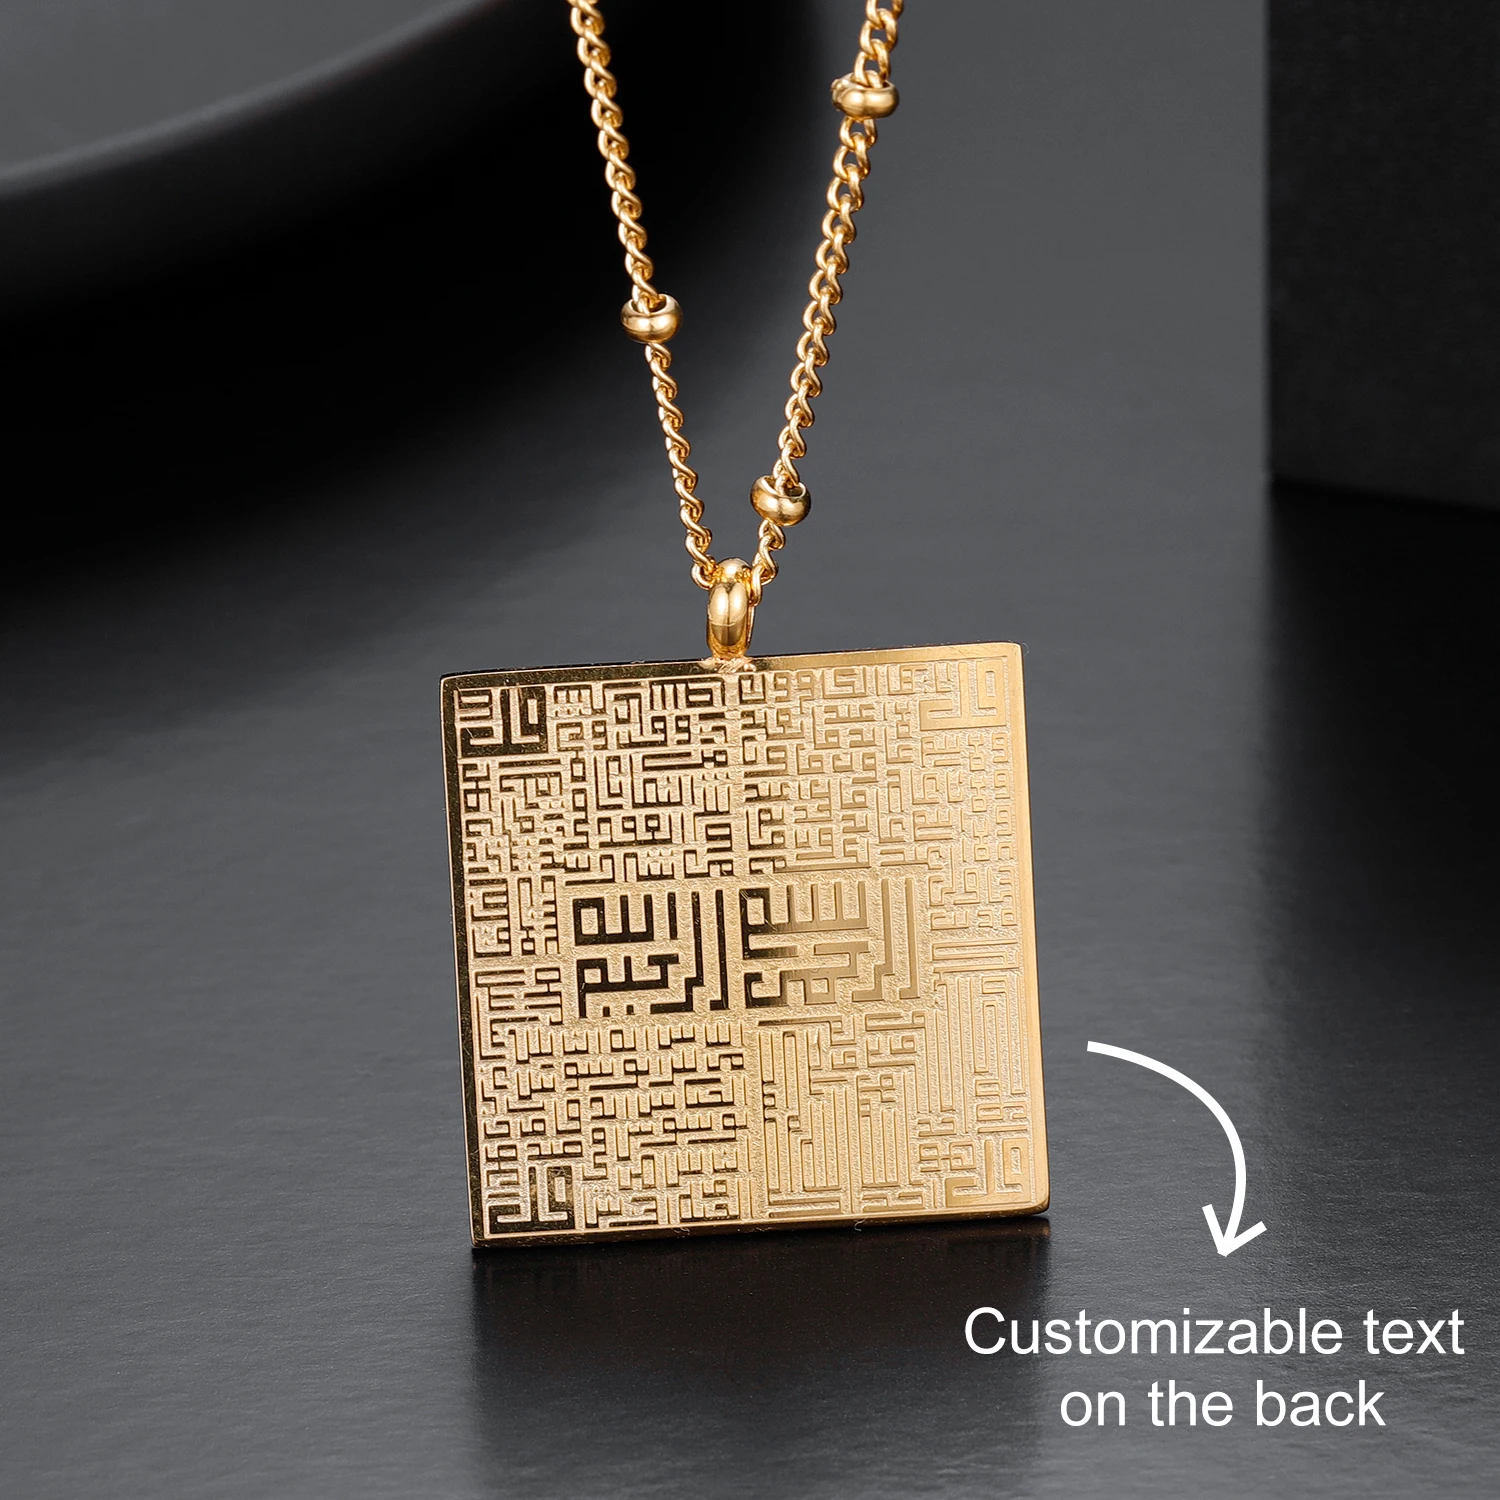 Arabic Calligraphy 4 Quls Quran Surah Customized Necklace for Women Gold Stainless Steel God Messager Islamic Jewelry Gift Men